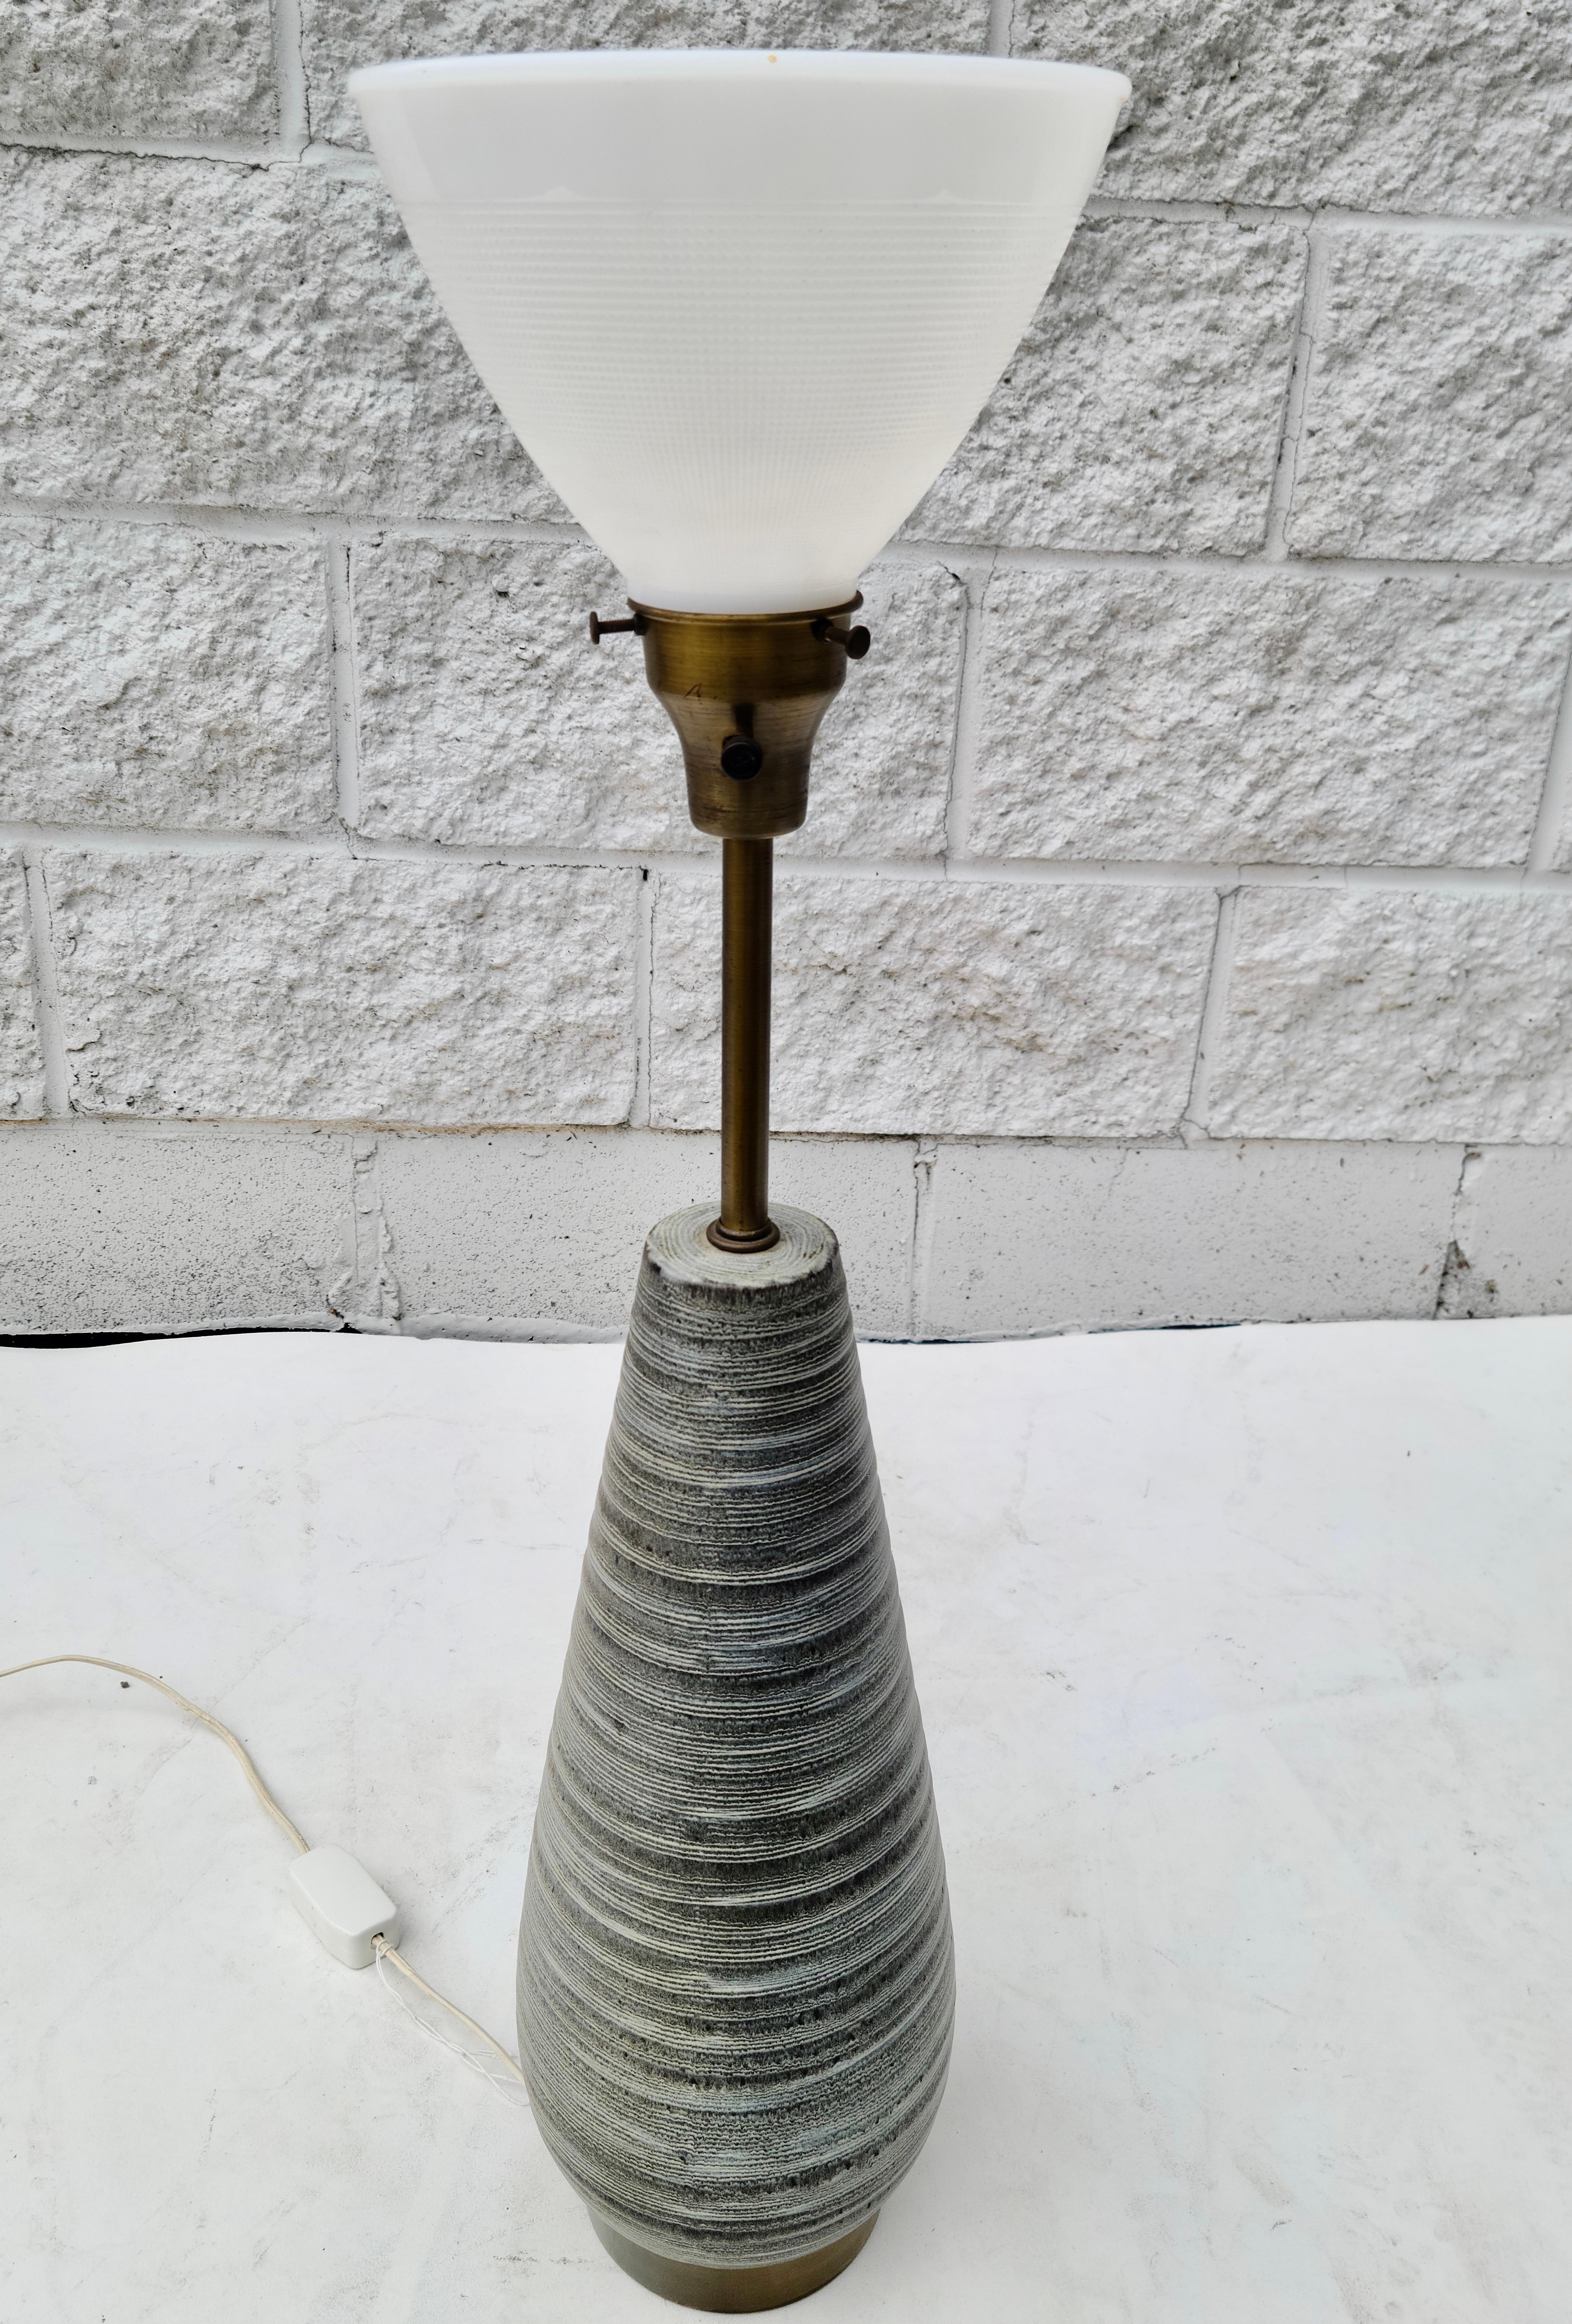 Raymor Ceramic Table Lamp in the style of Paul McCobb Ursula Meyer For Sale 6